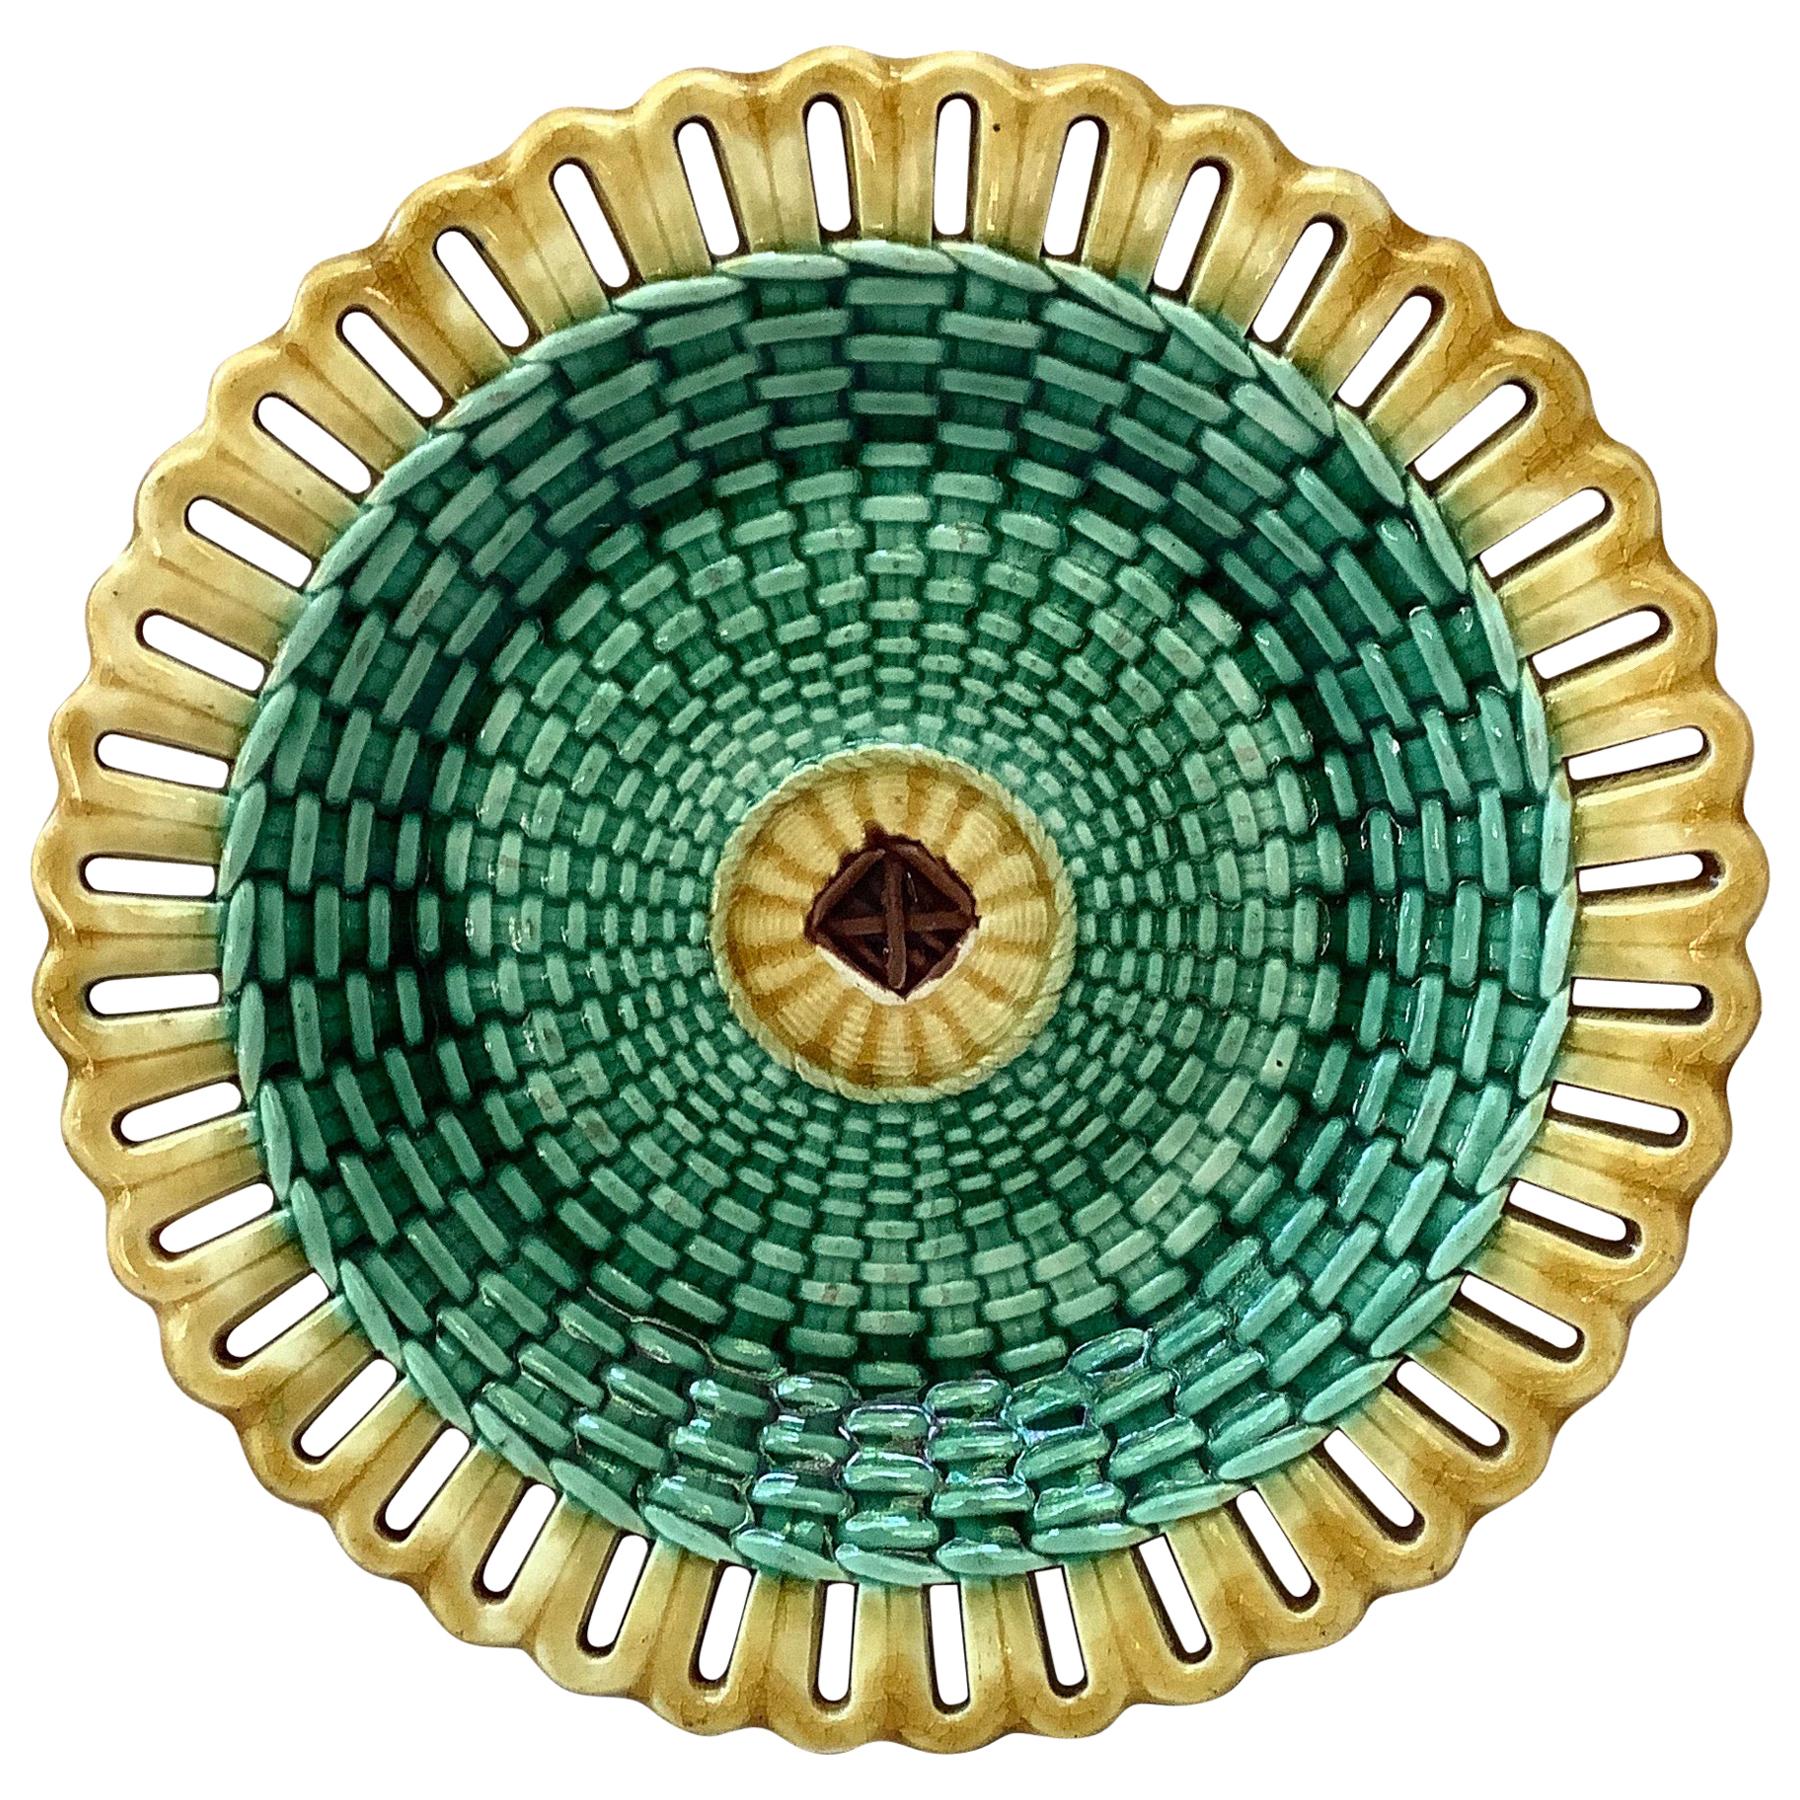 19th Century Wedgwood Majolica Reticulated and Basketweave Plate